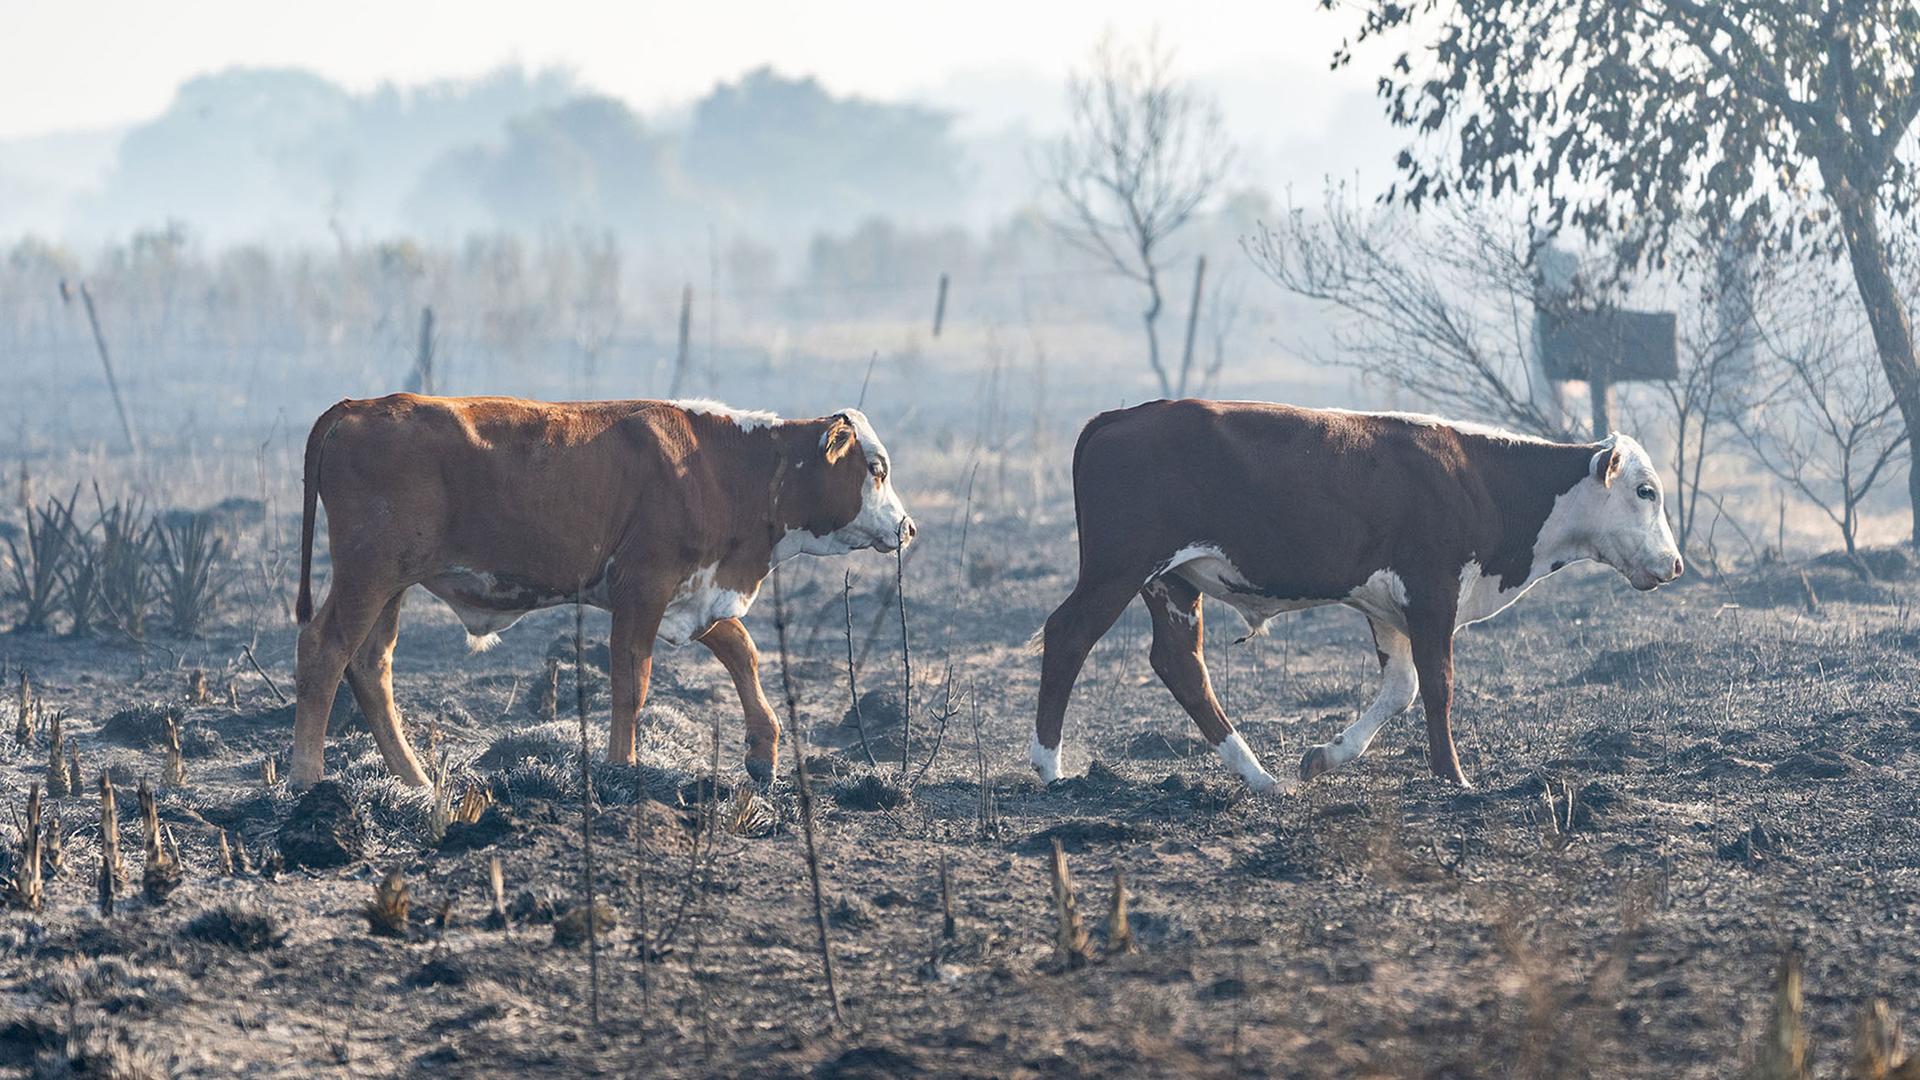 Cows walk across charred areas of the Iberá wetlands devastated by fires in northern Argentina